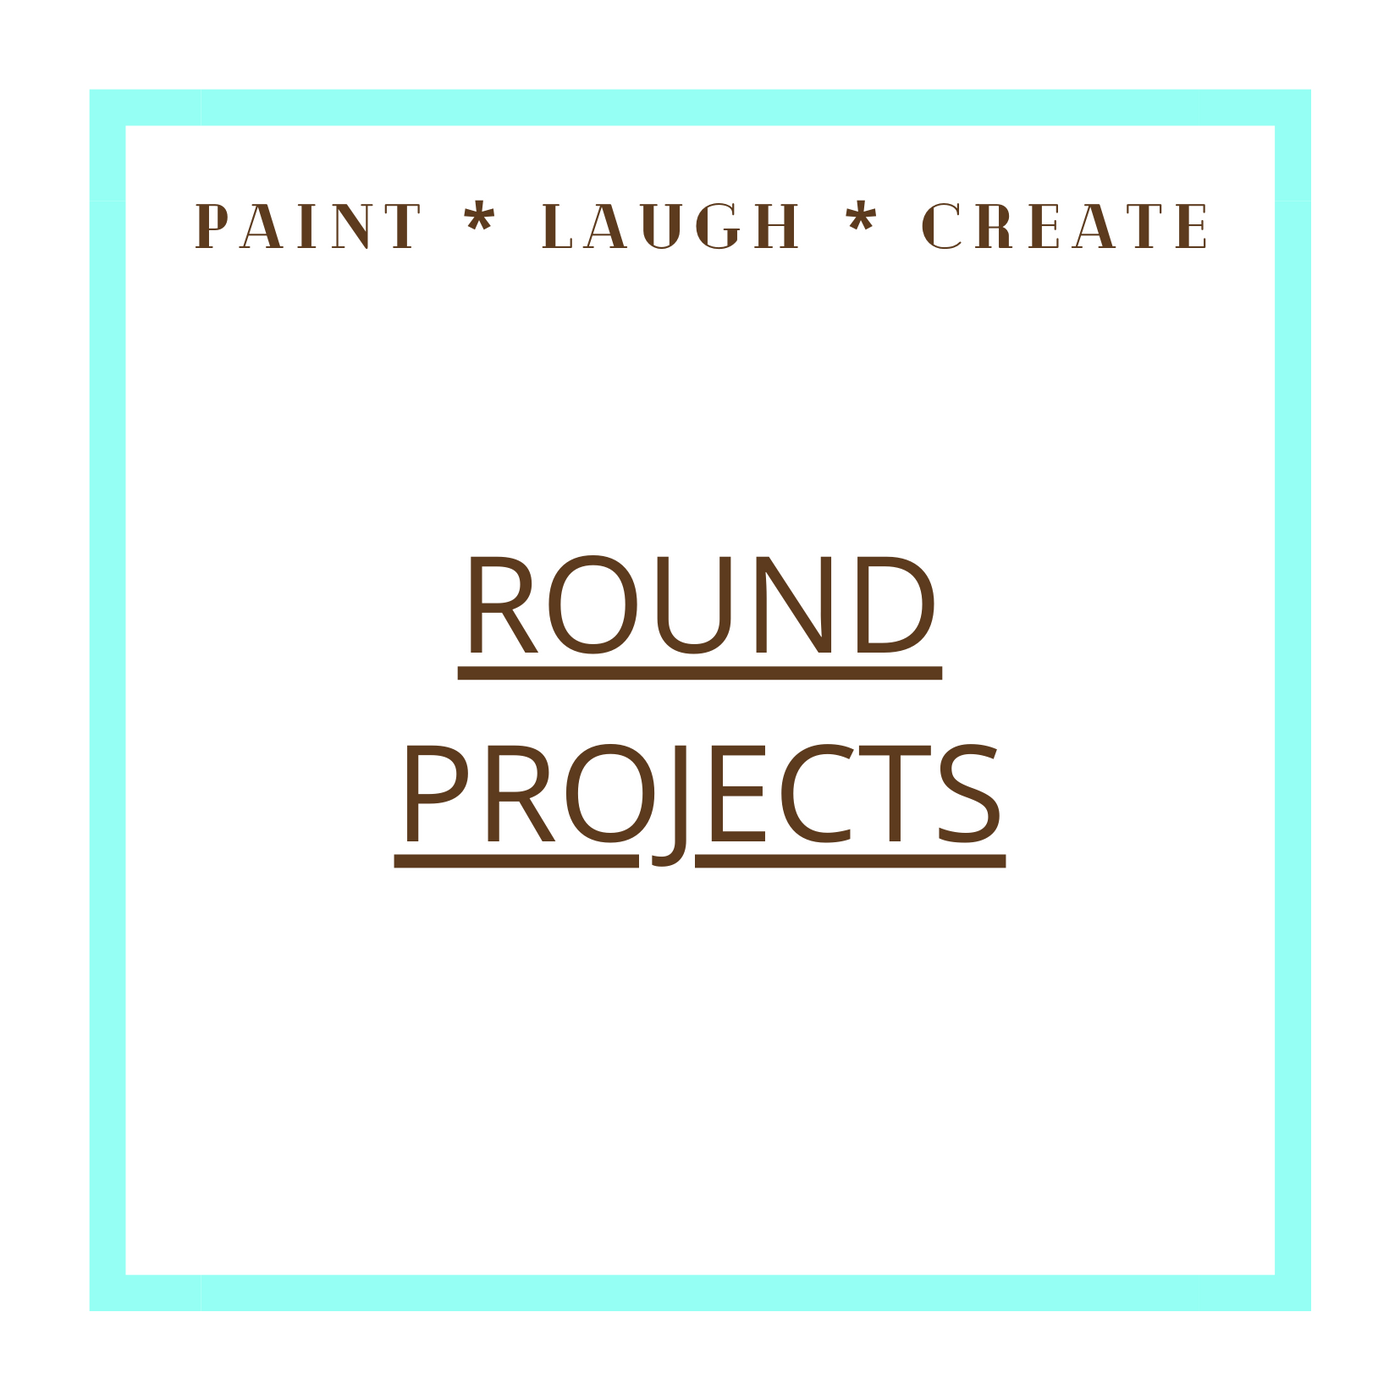 ROUND PROJECTS